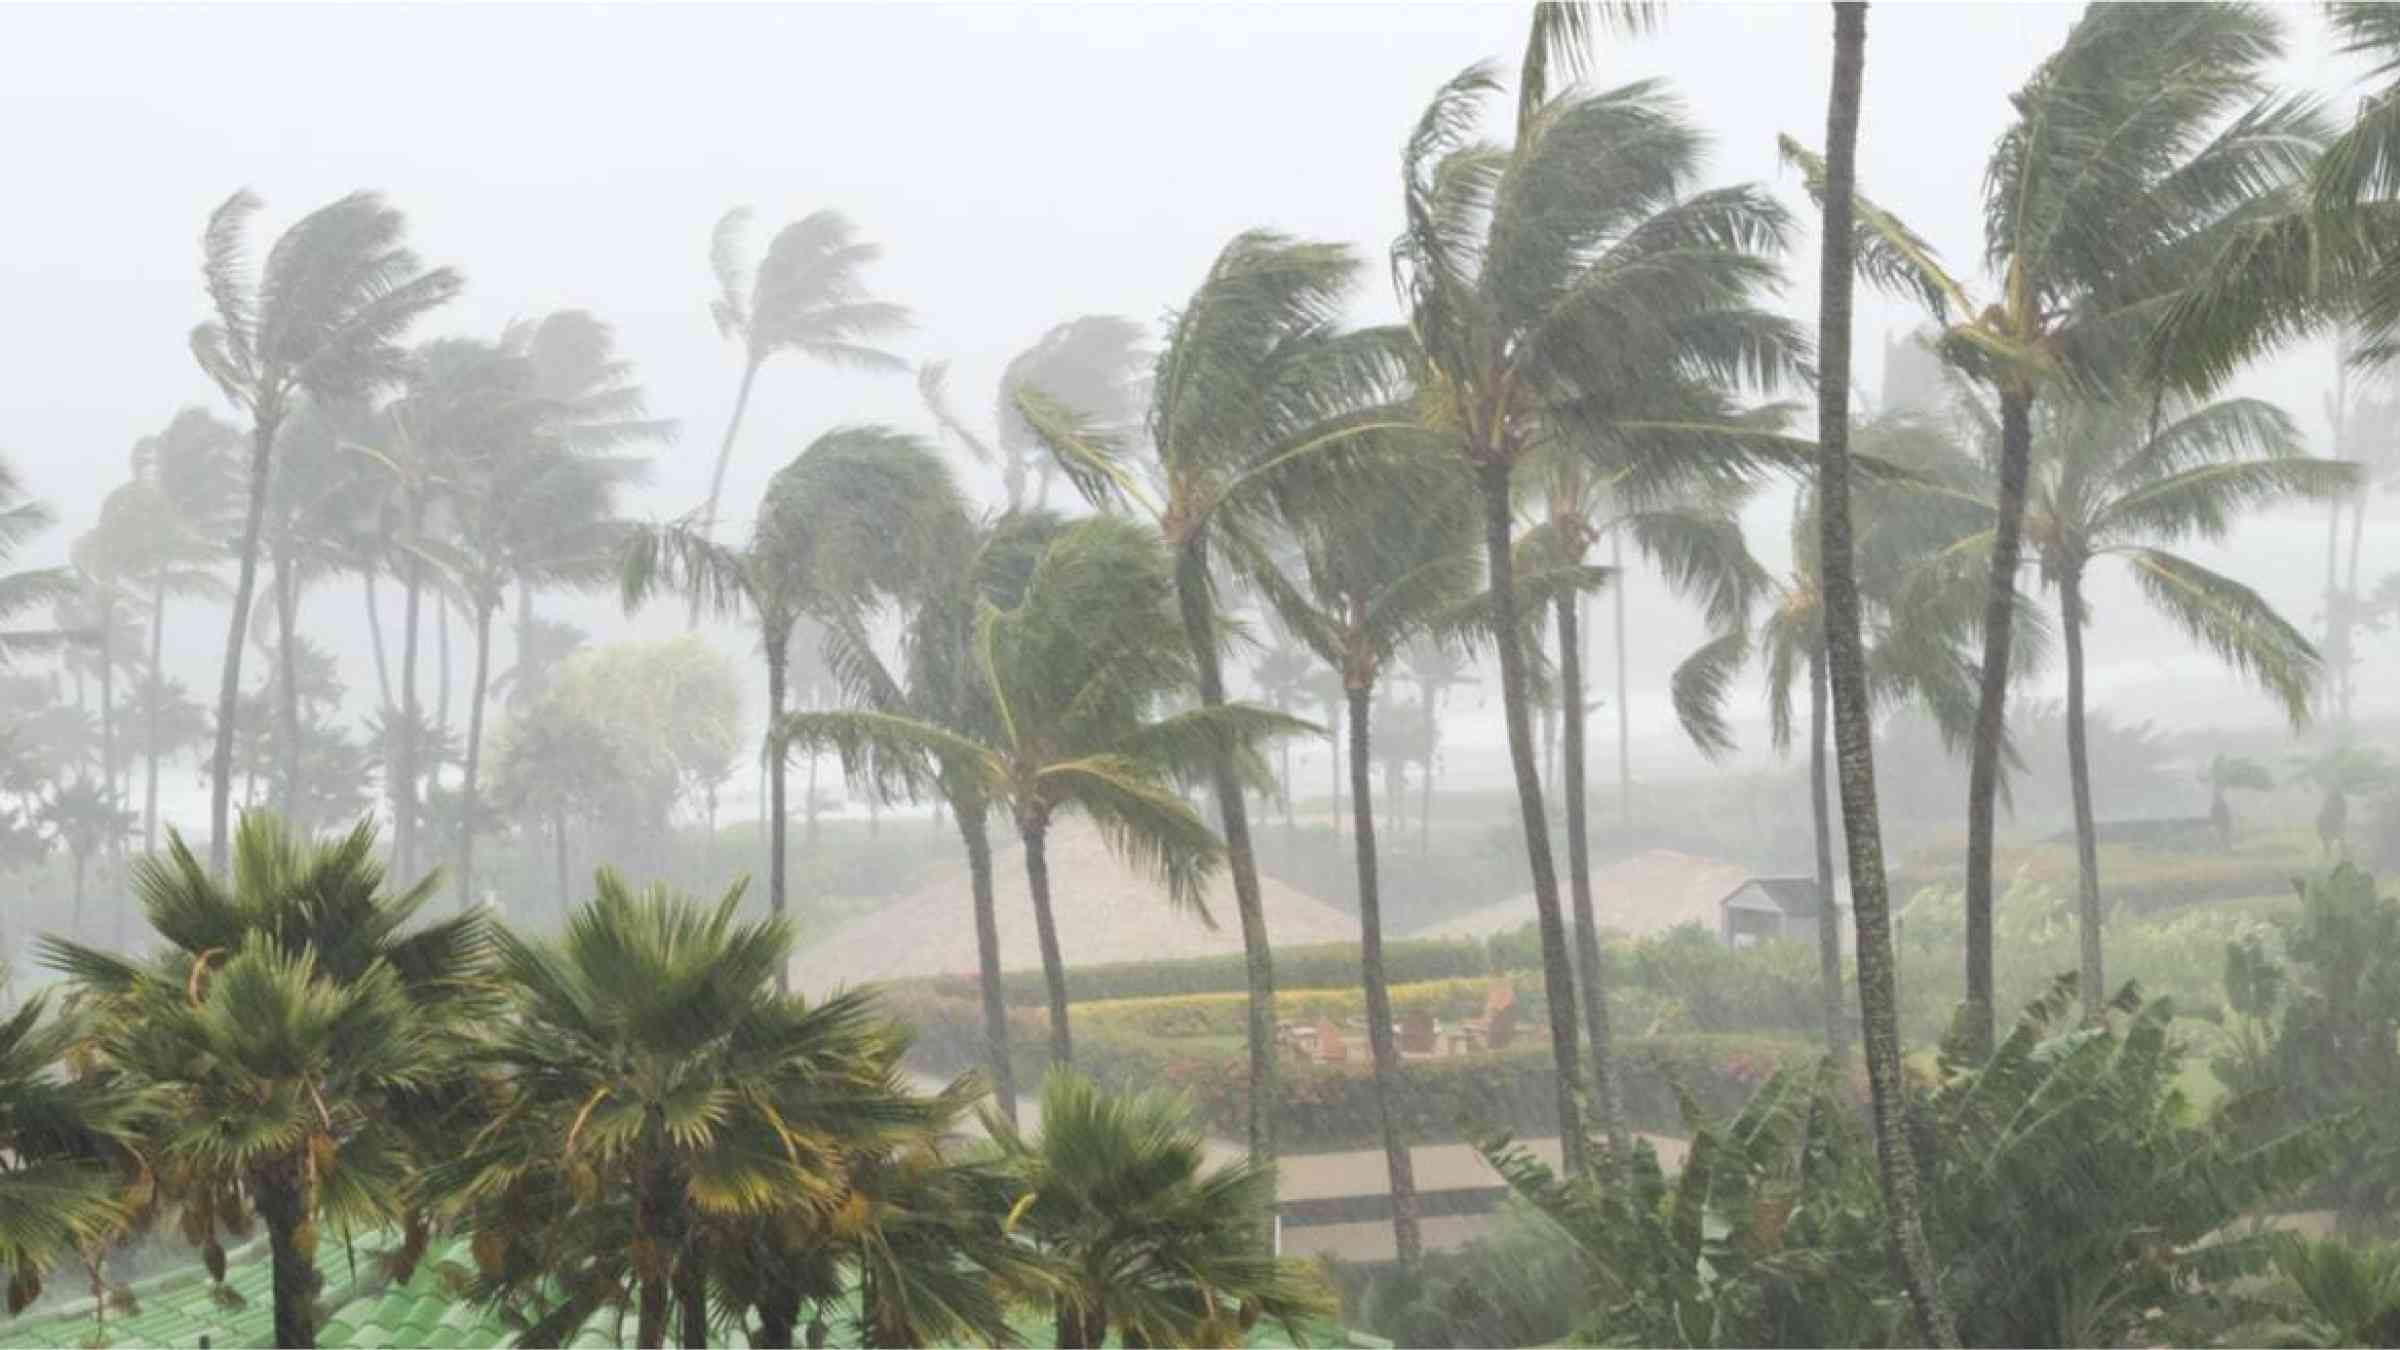 Palm trees being hit by storm and rainfall during a hurricane